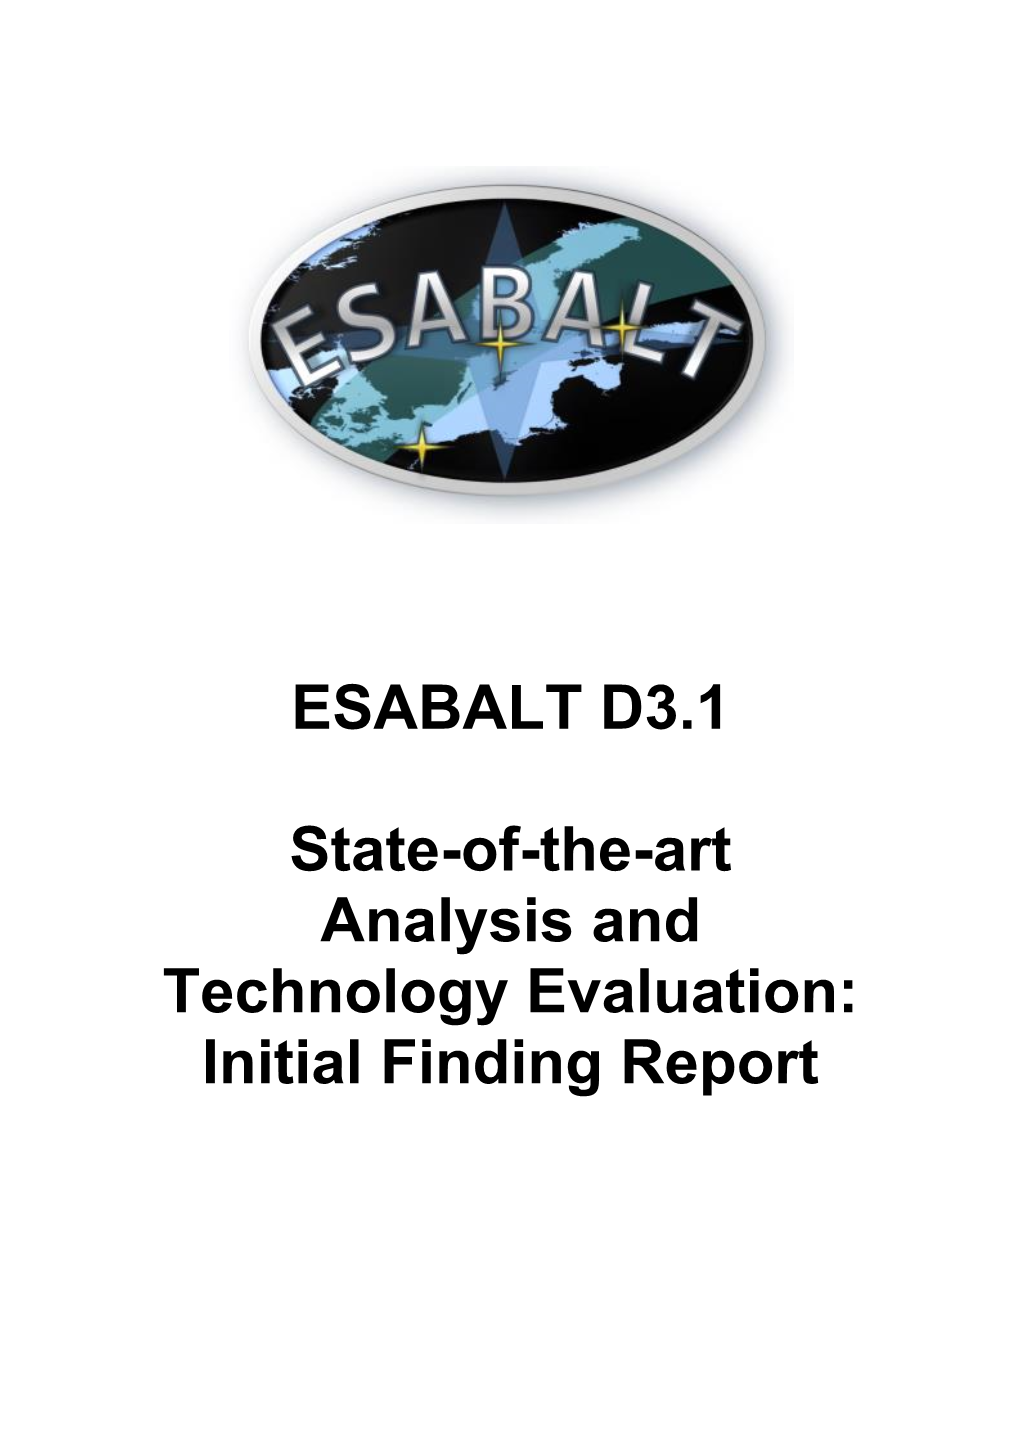 ESABALT D3.1 State-Of-The-Art Analysis and Technology Evaluation